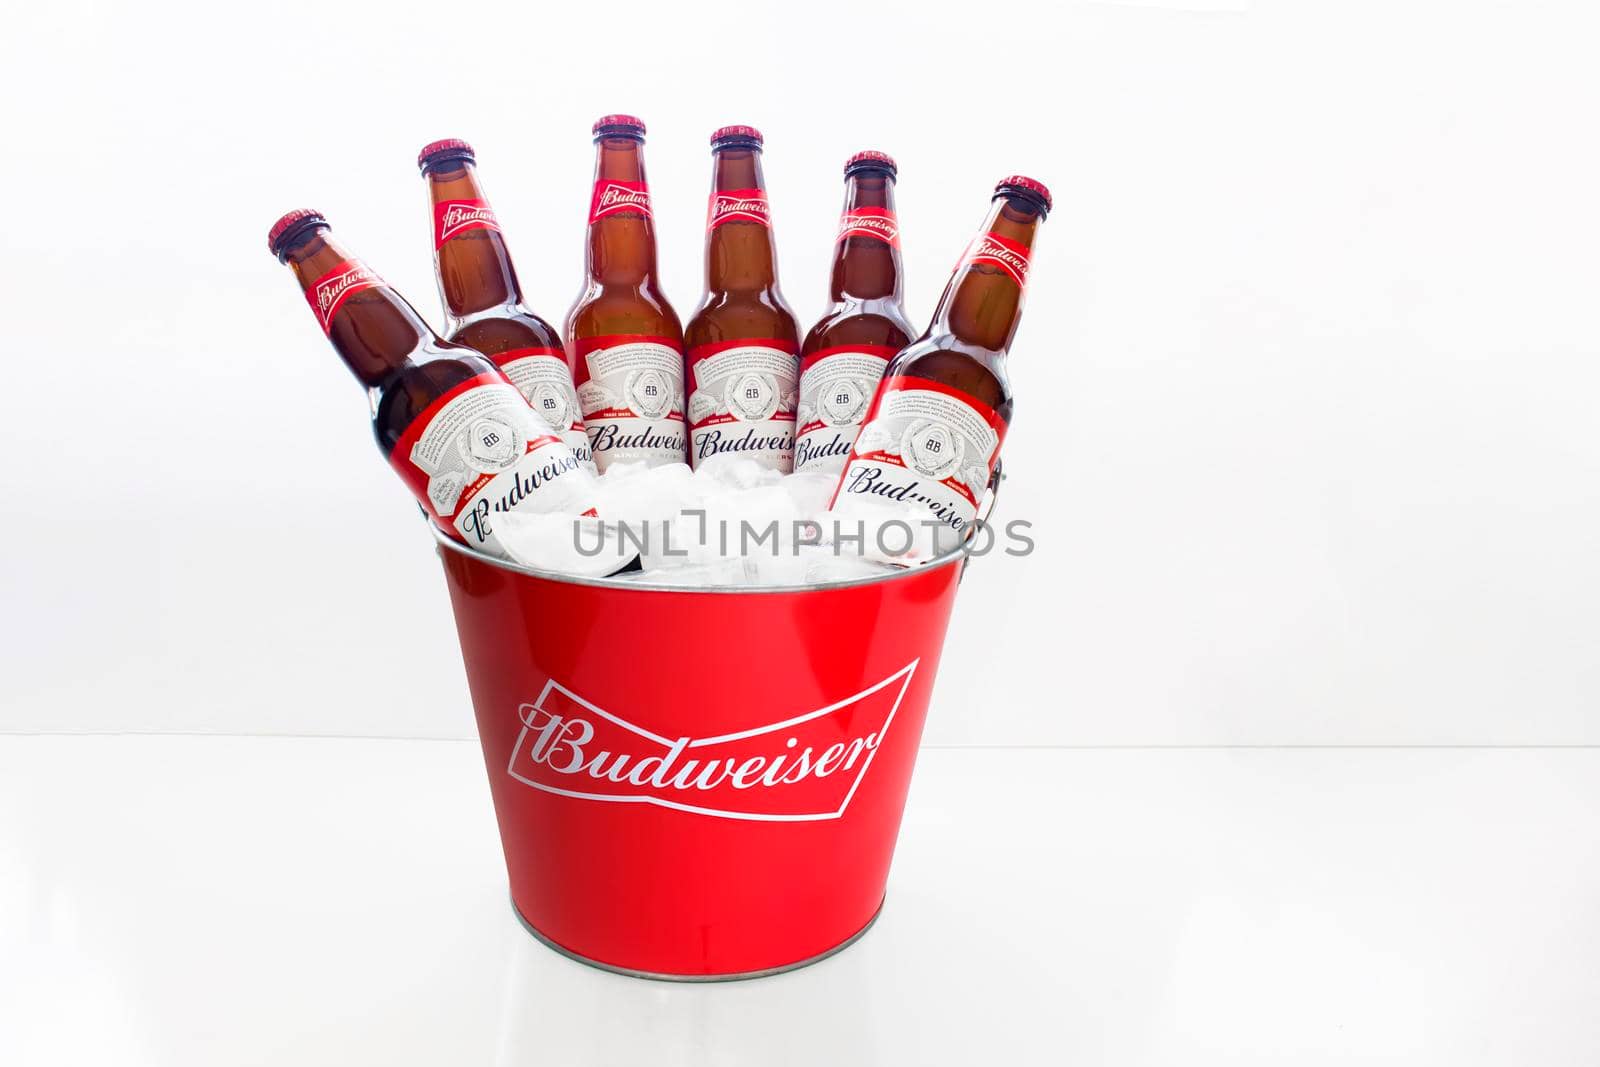 Calgary Alberta, Canada. April 02, 2021. A Budweiser Beer Bucket American-style pale lager with six beer bottles with ice on a white background. by oasisamuel